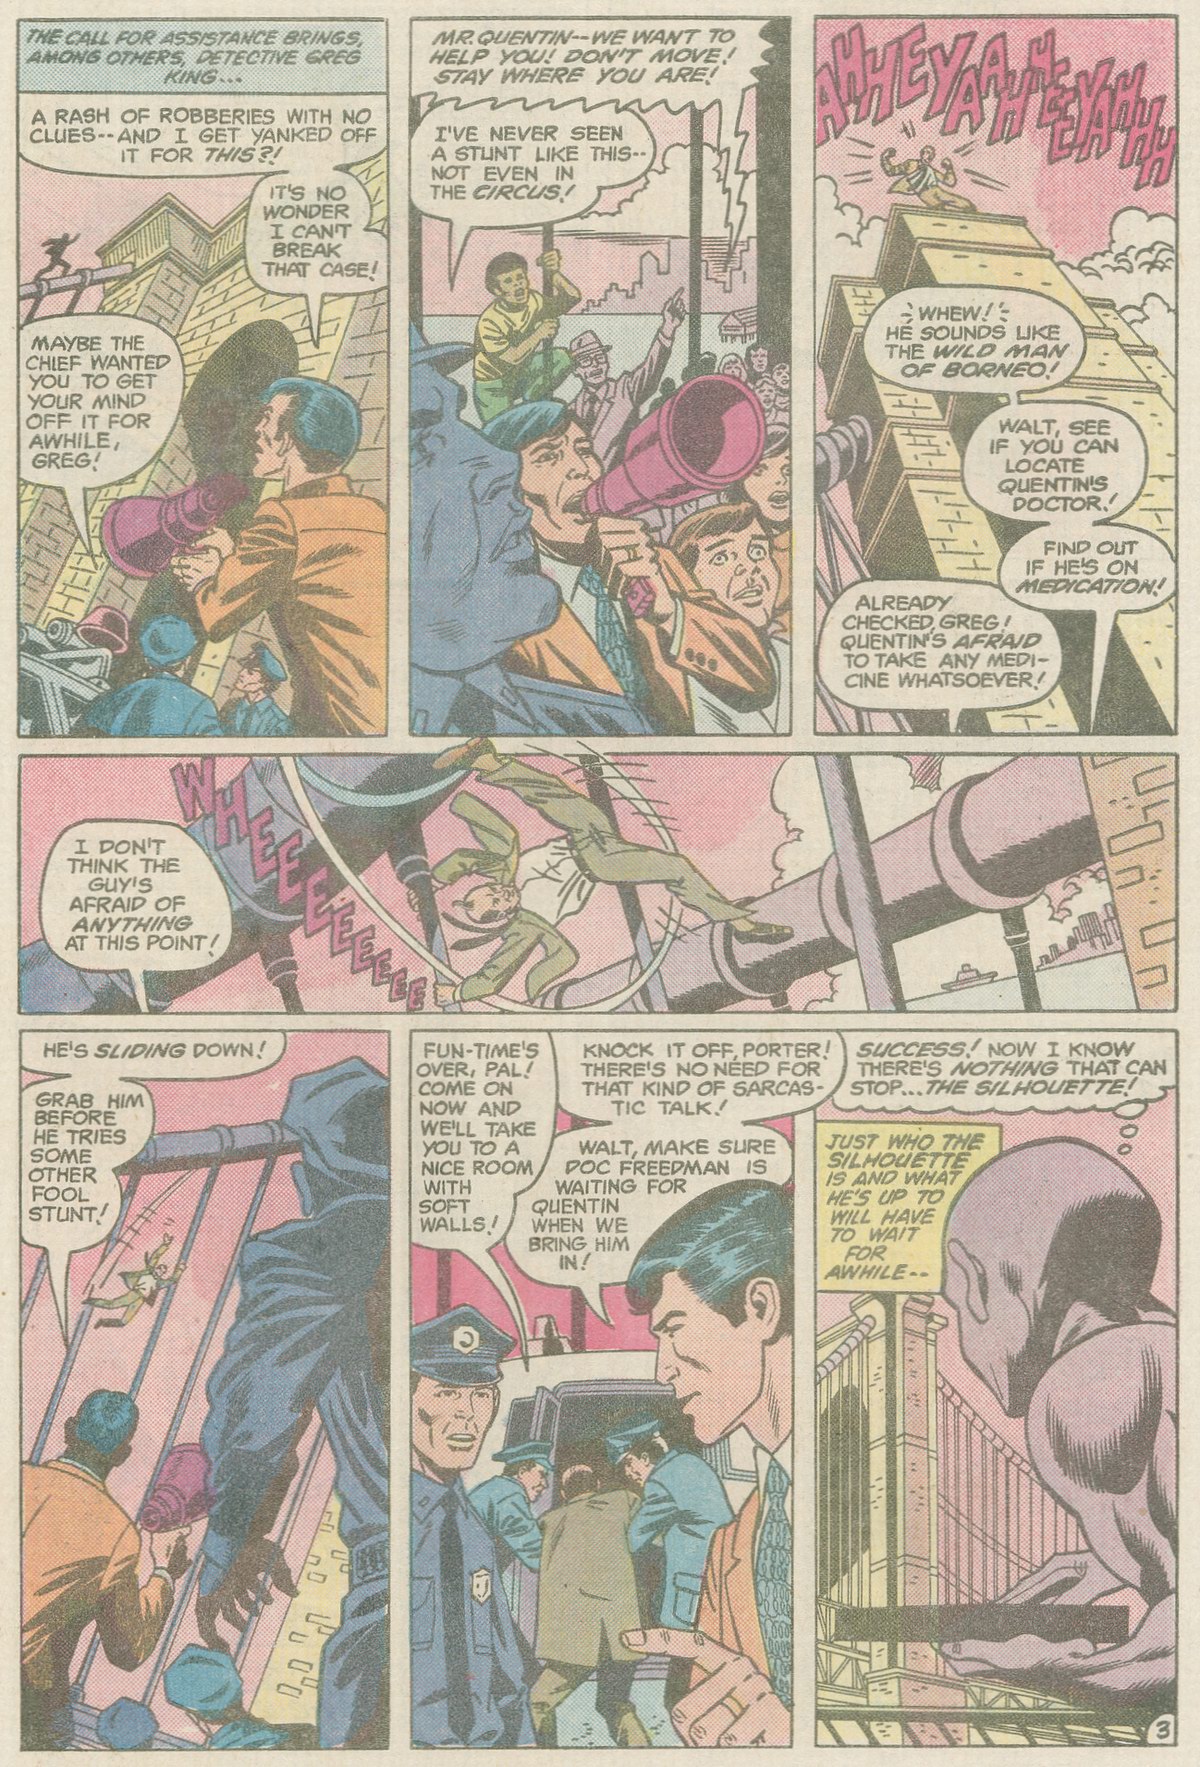 The New Adventures of Superboy 38 Page 20